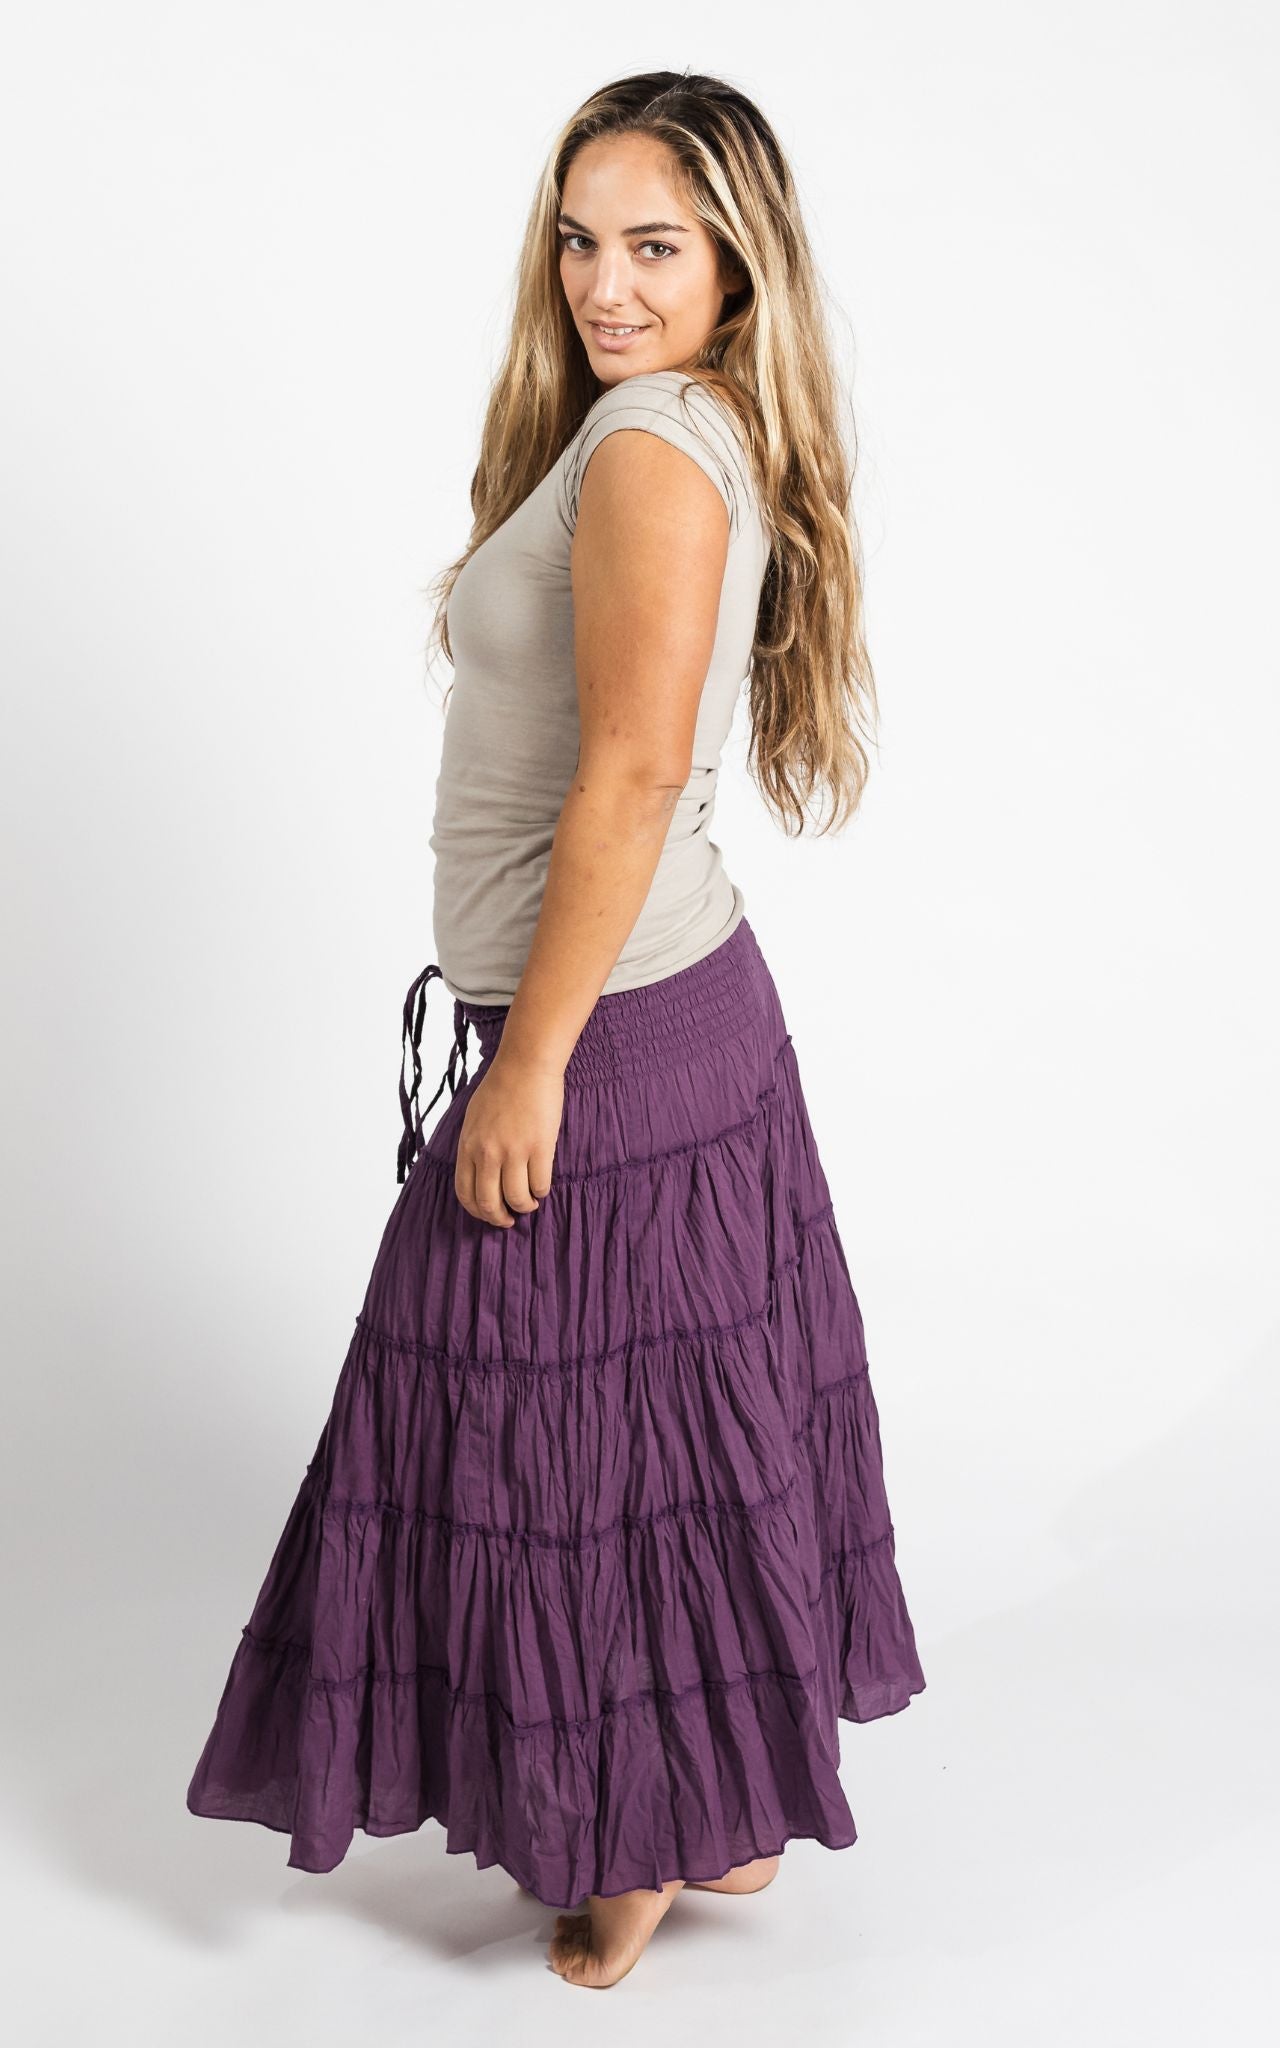 Surya Australia Ethical Cotton 'Franit' Skirt made in Nepal - Lilac